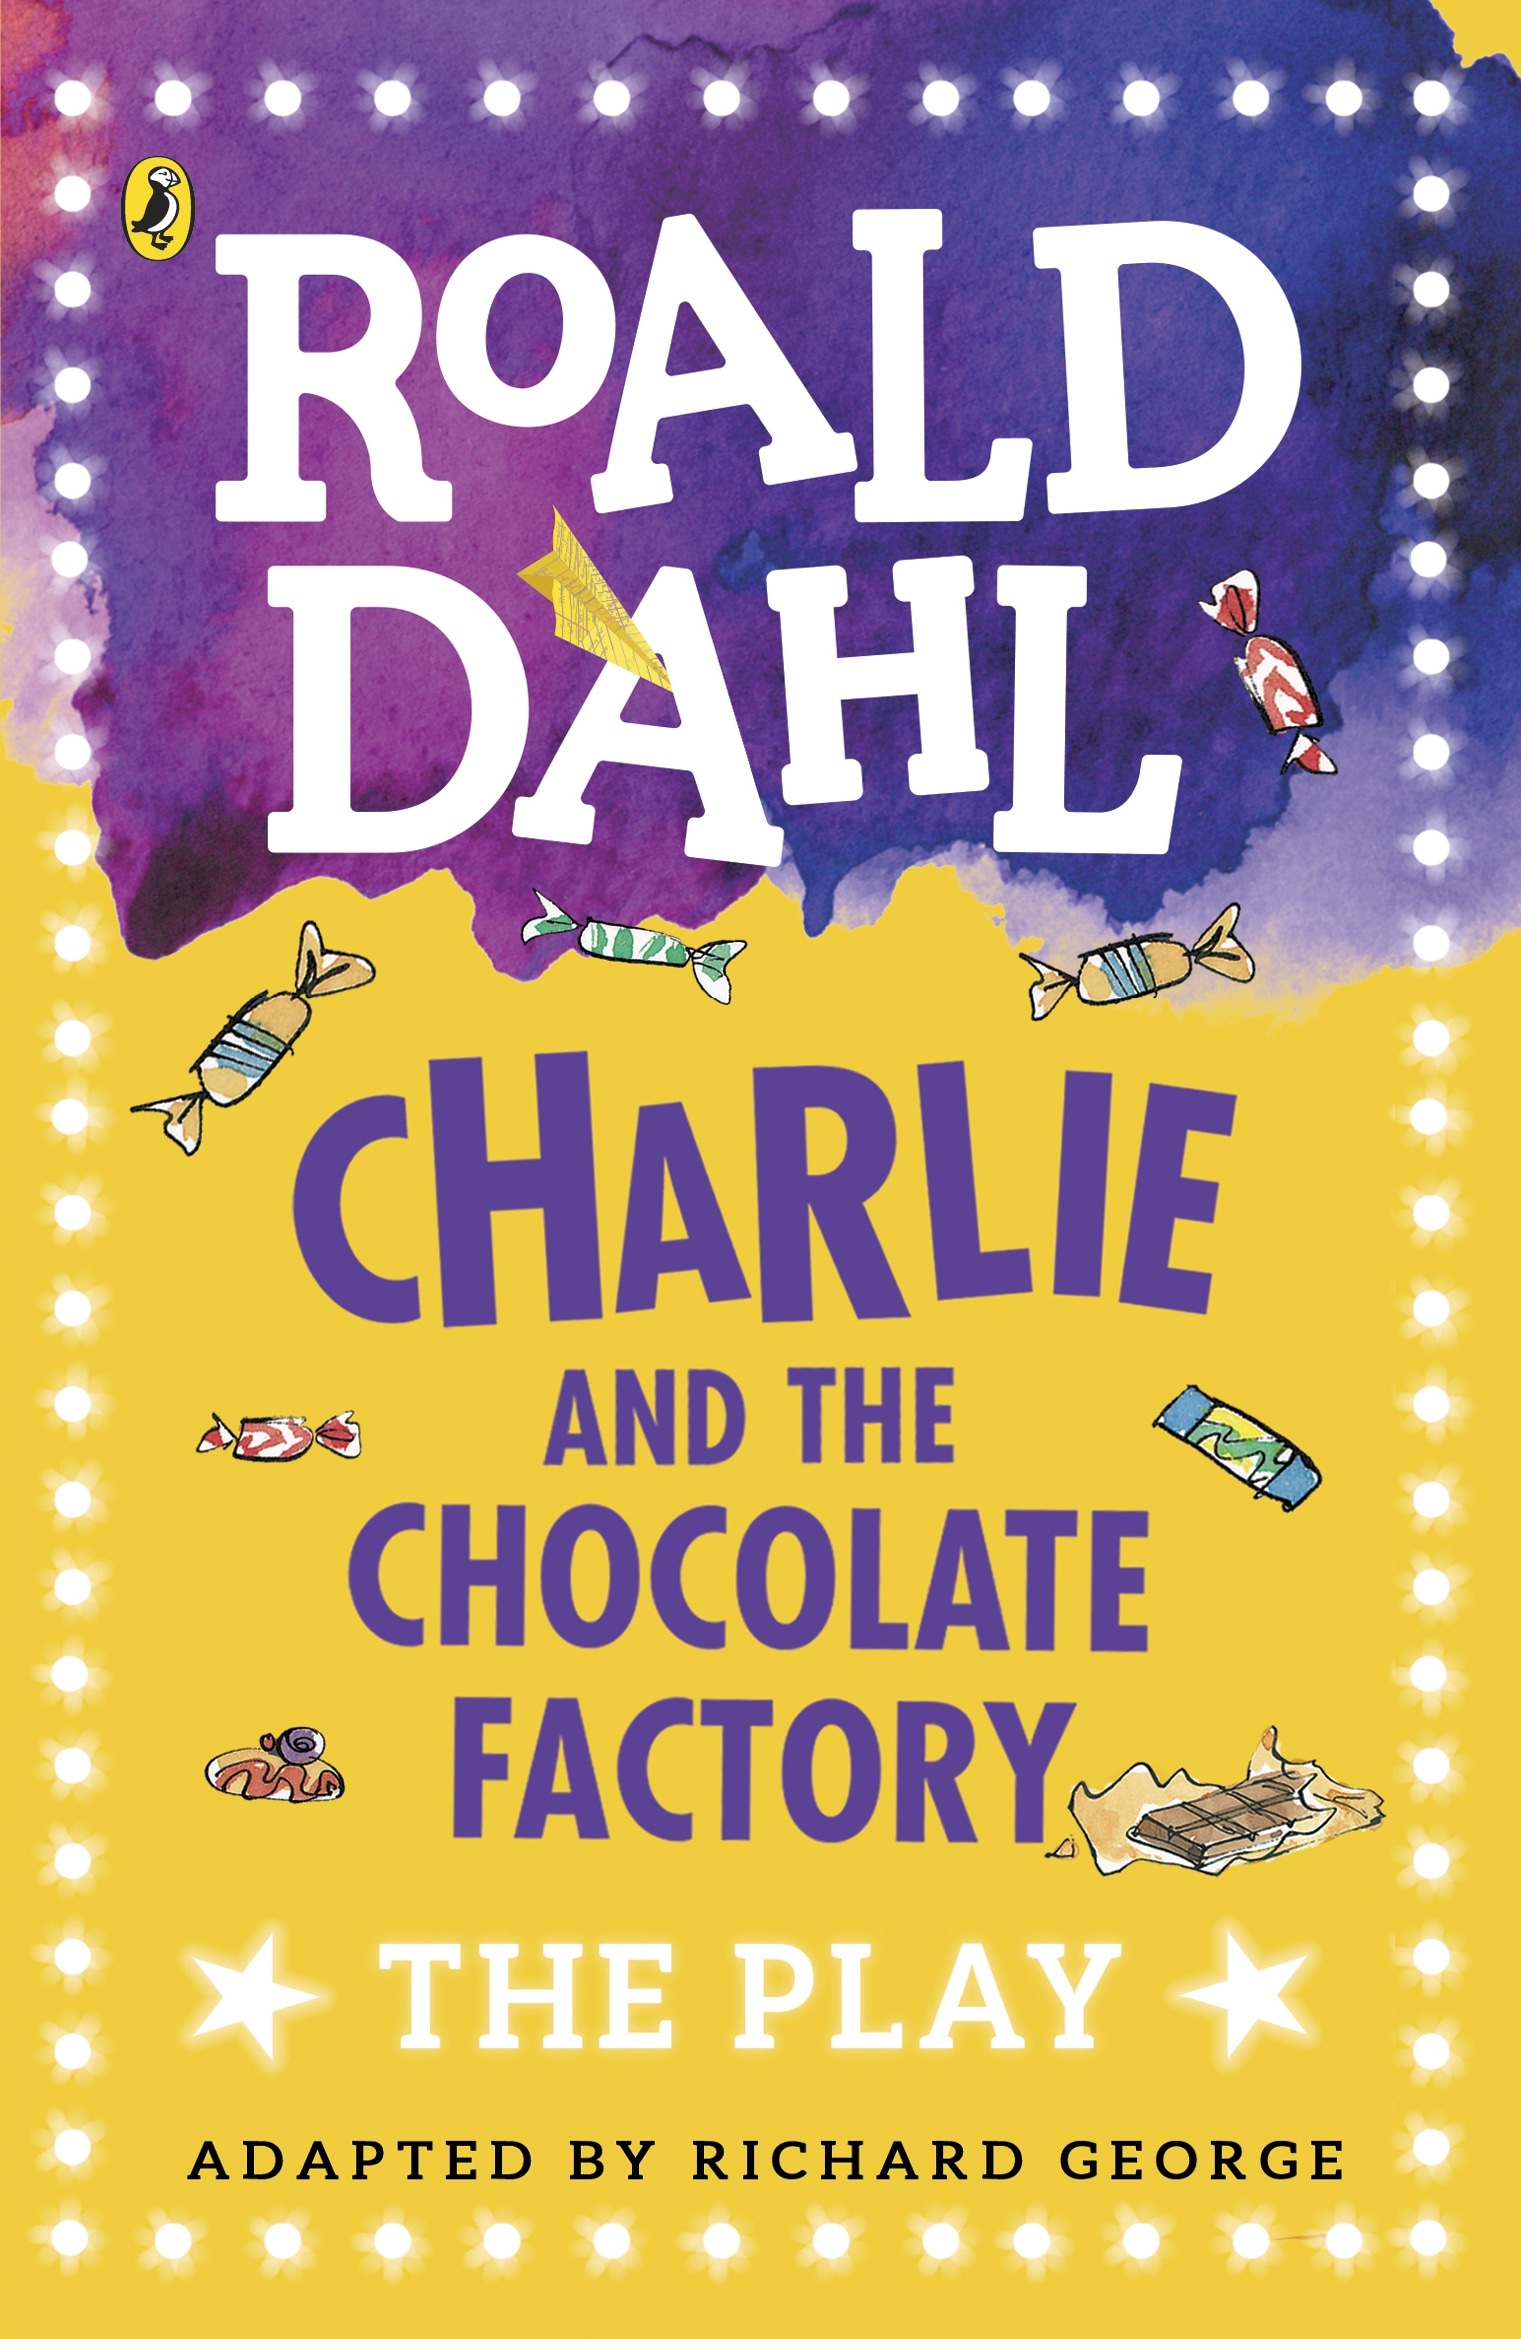 Book “Charlie and the Chocolate Factory” by Roald Dahl — August 3, 2017